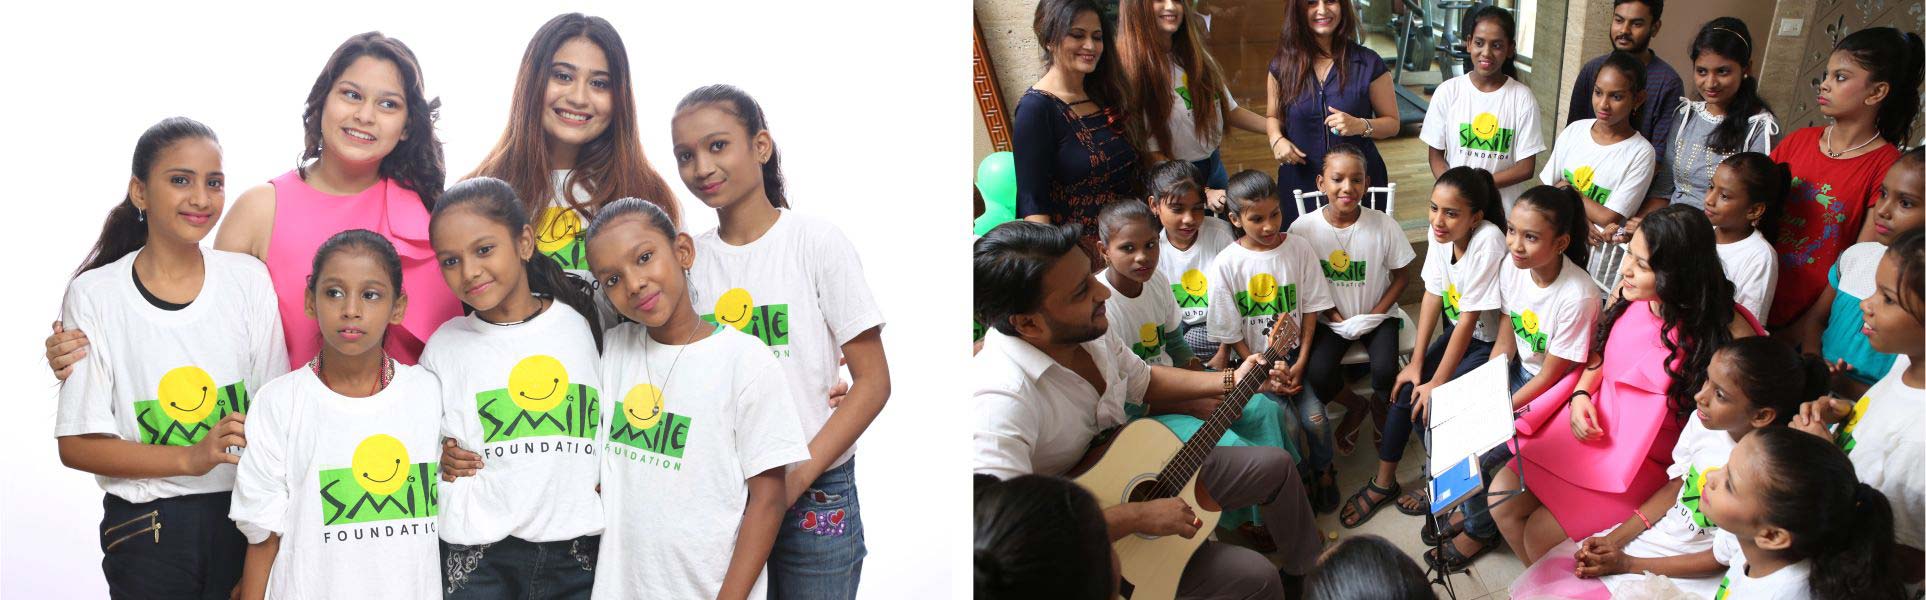 CFC Goodwill Ambassador spends a fun day with Smile Foundation children